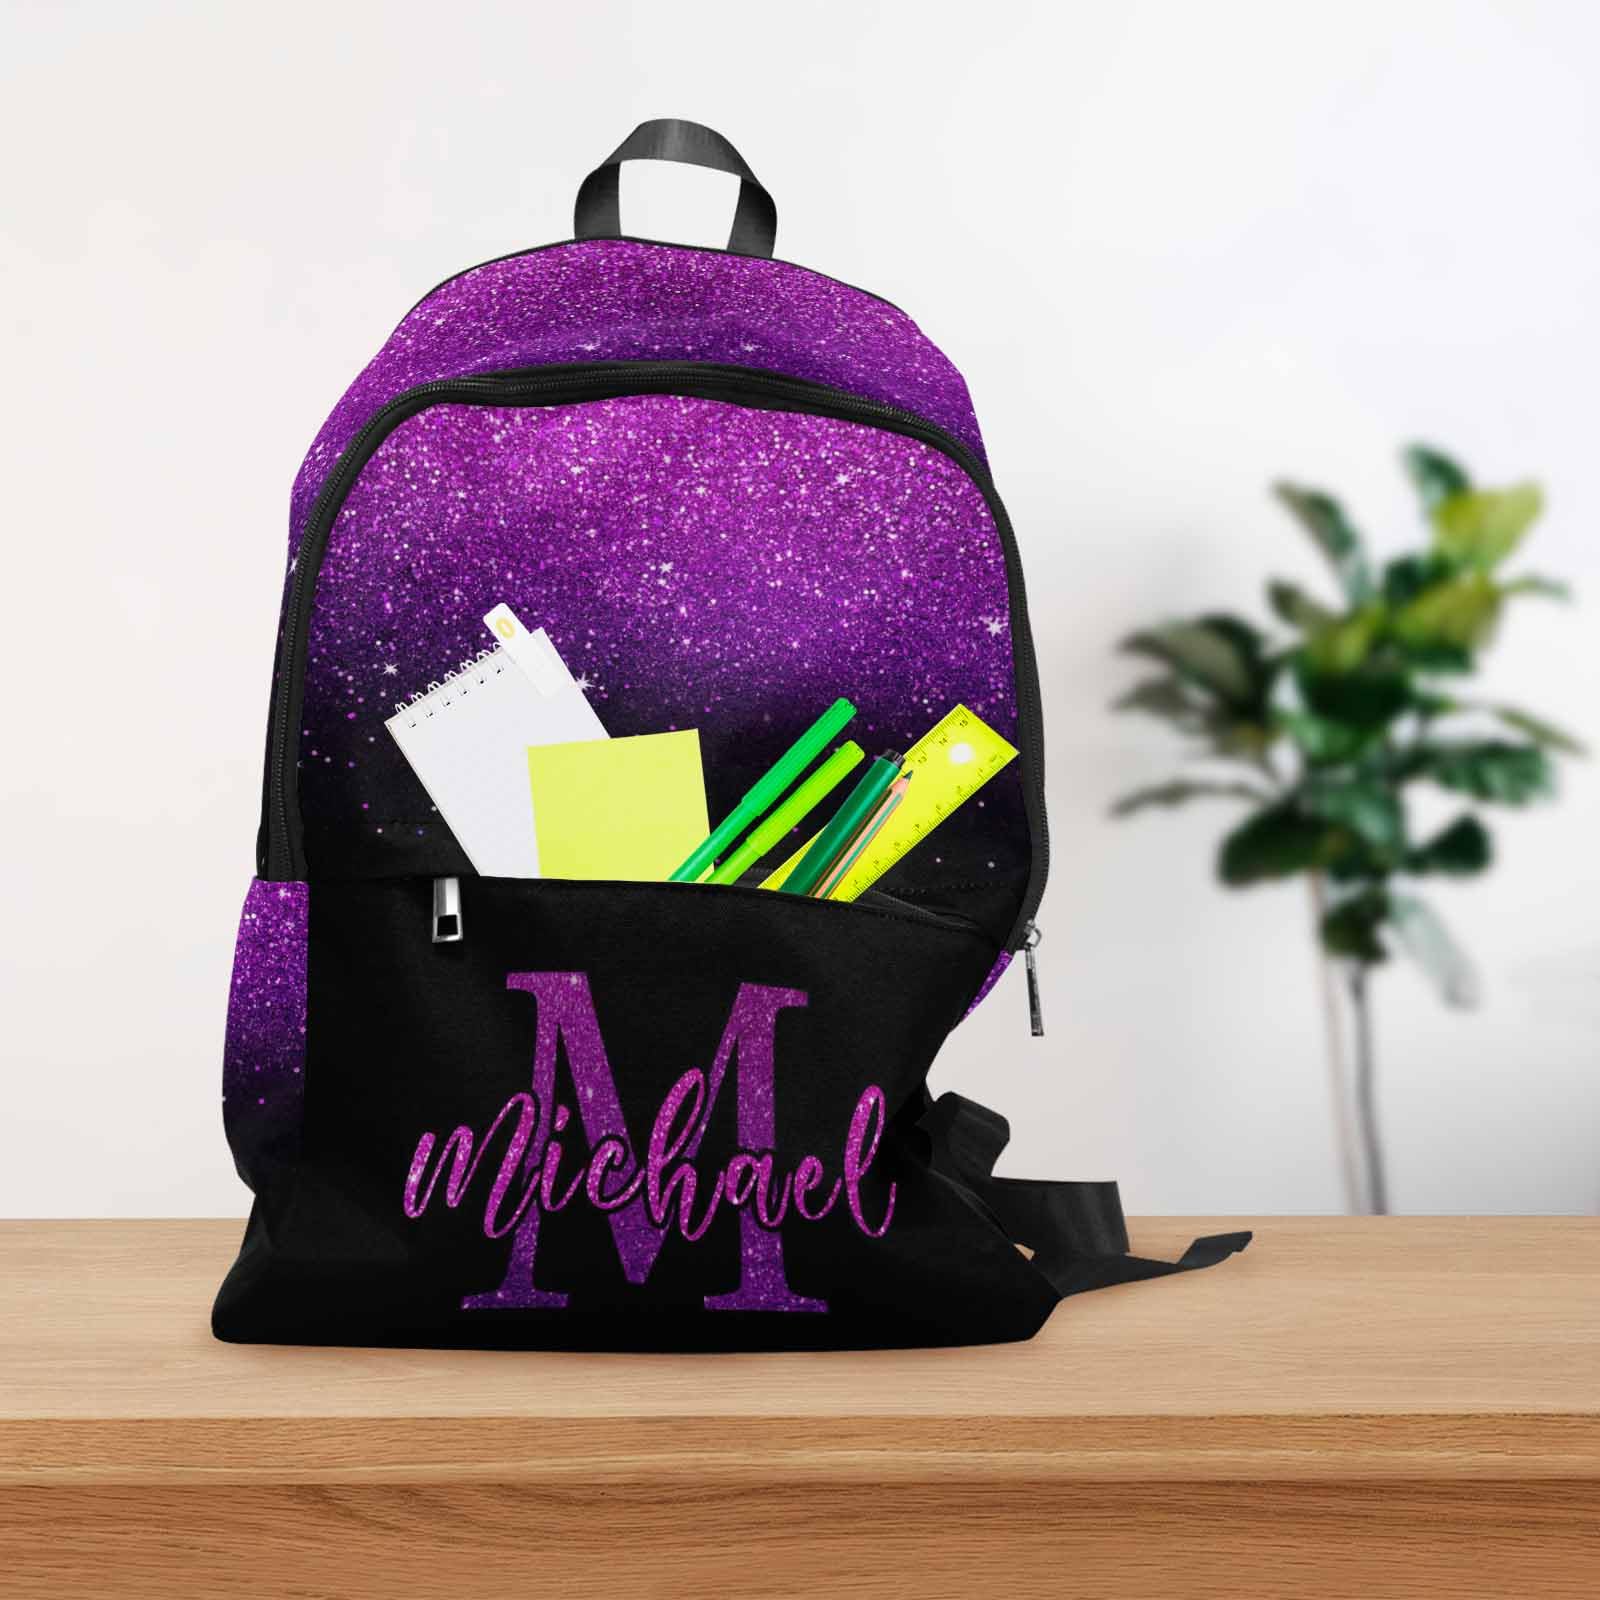 MyPupSocks Personalized School Backpack for Daughter from Mom, Custom Purple Shining Glitter Stars Casual Daypacks Customized Travel Book Bag with Name Knapsack Schoolbag for Teens Boys Girls College